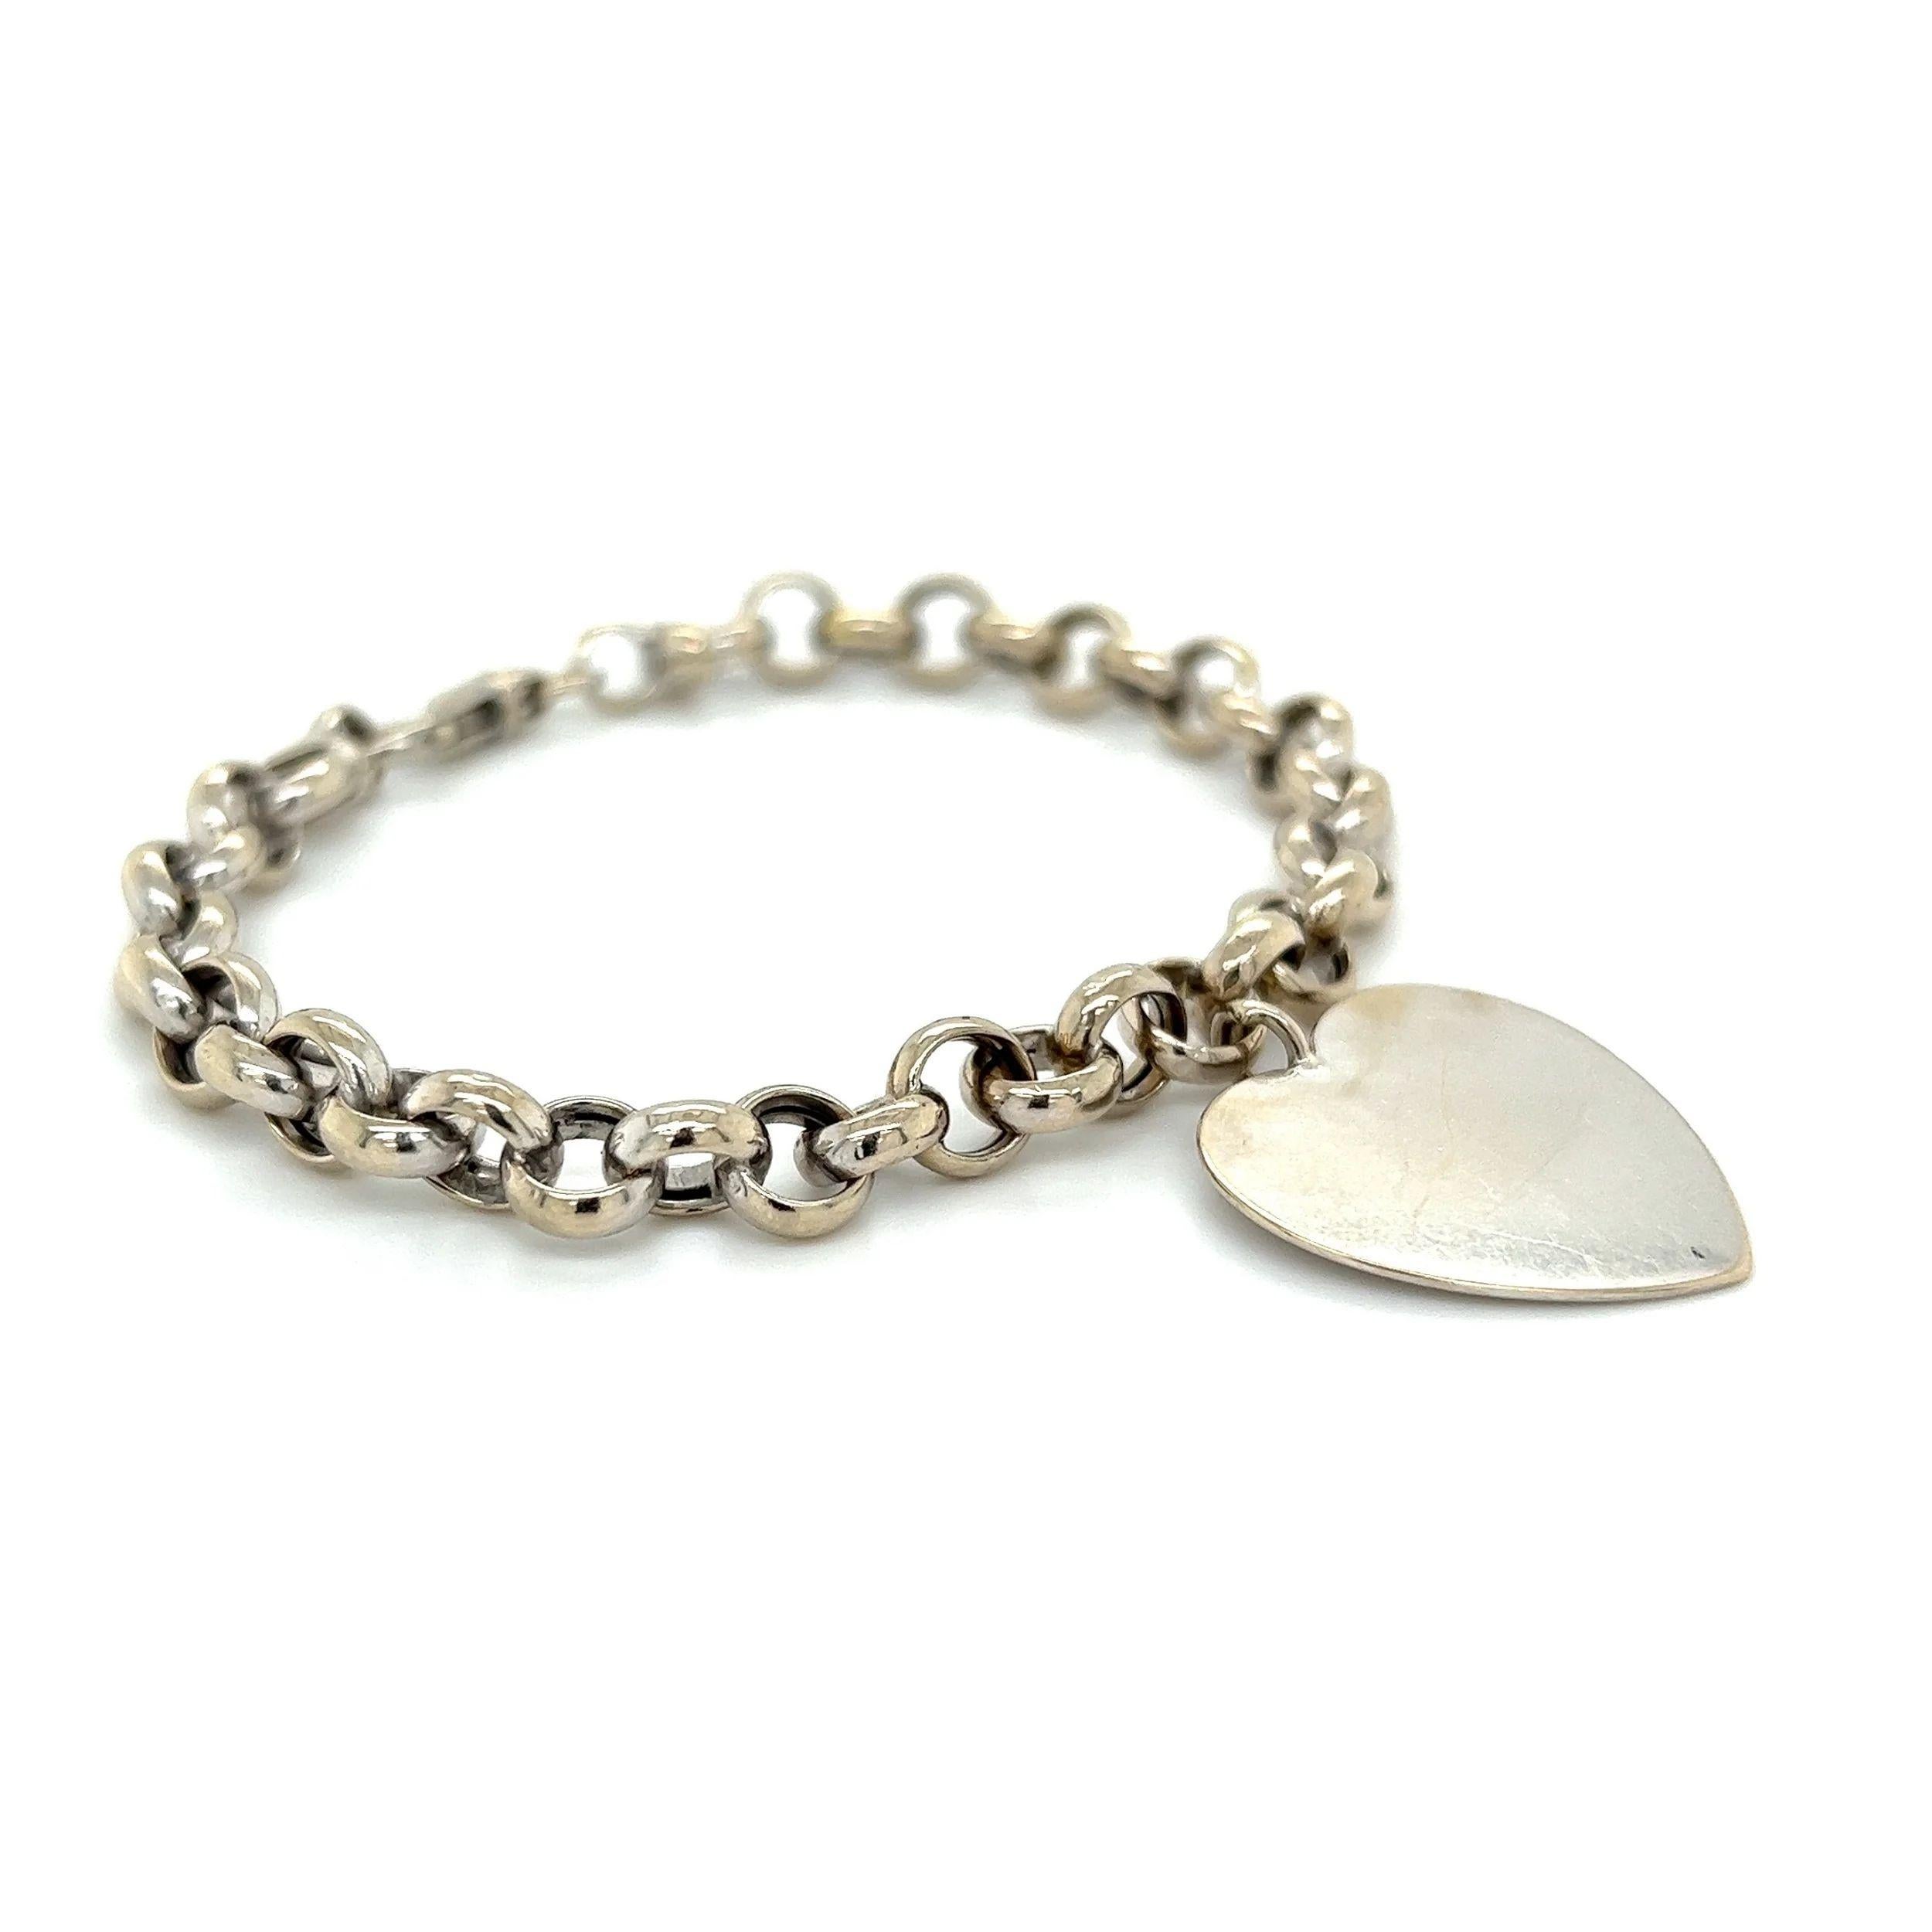 Simply Beautiful! Mid Century Modern Gold 6.8mm Circle Link Bracelet with dangling Heart. Beautifully Hand crafted in 14K White Gold. Measuring approx. 7.25” long. More Beautiful in Real time! Classic and Timeless…Sure to be admired…A piece you’ll